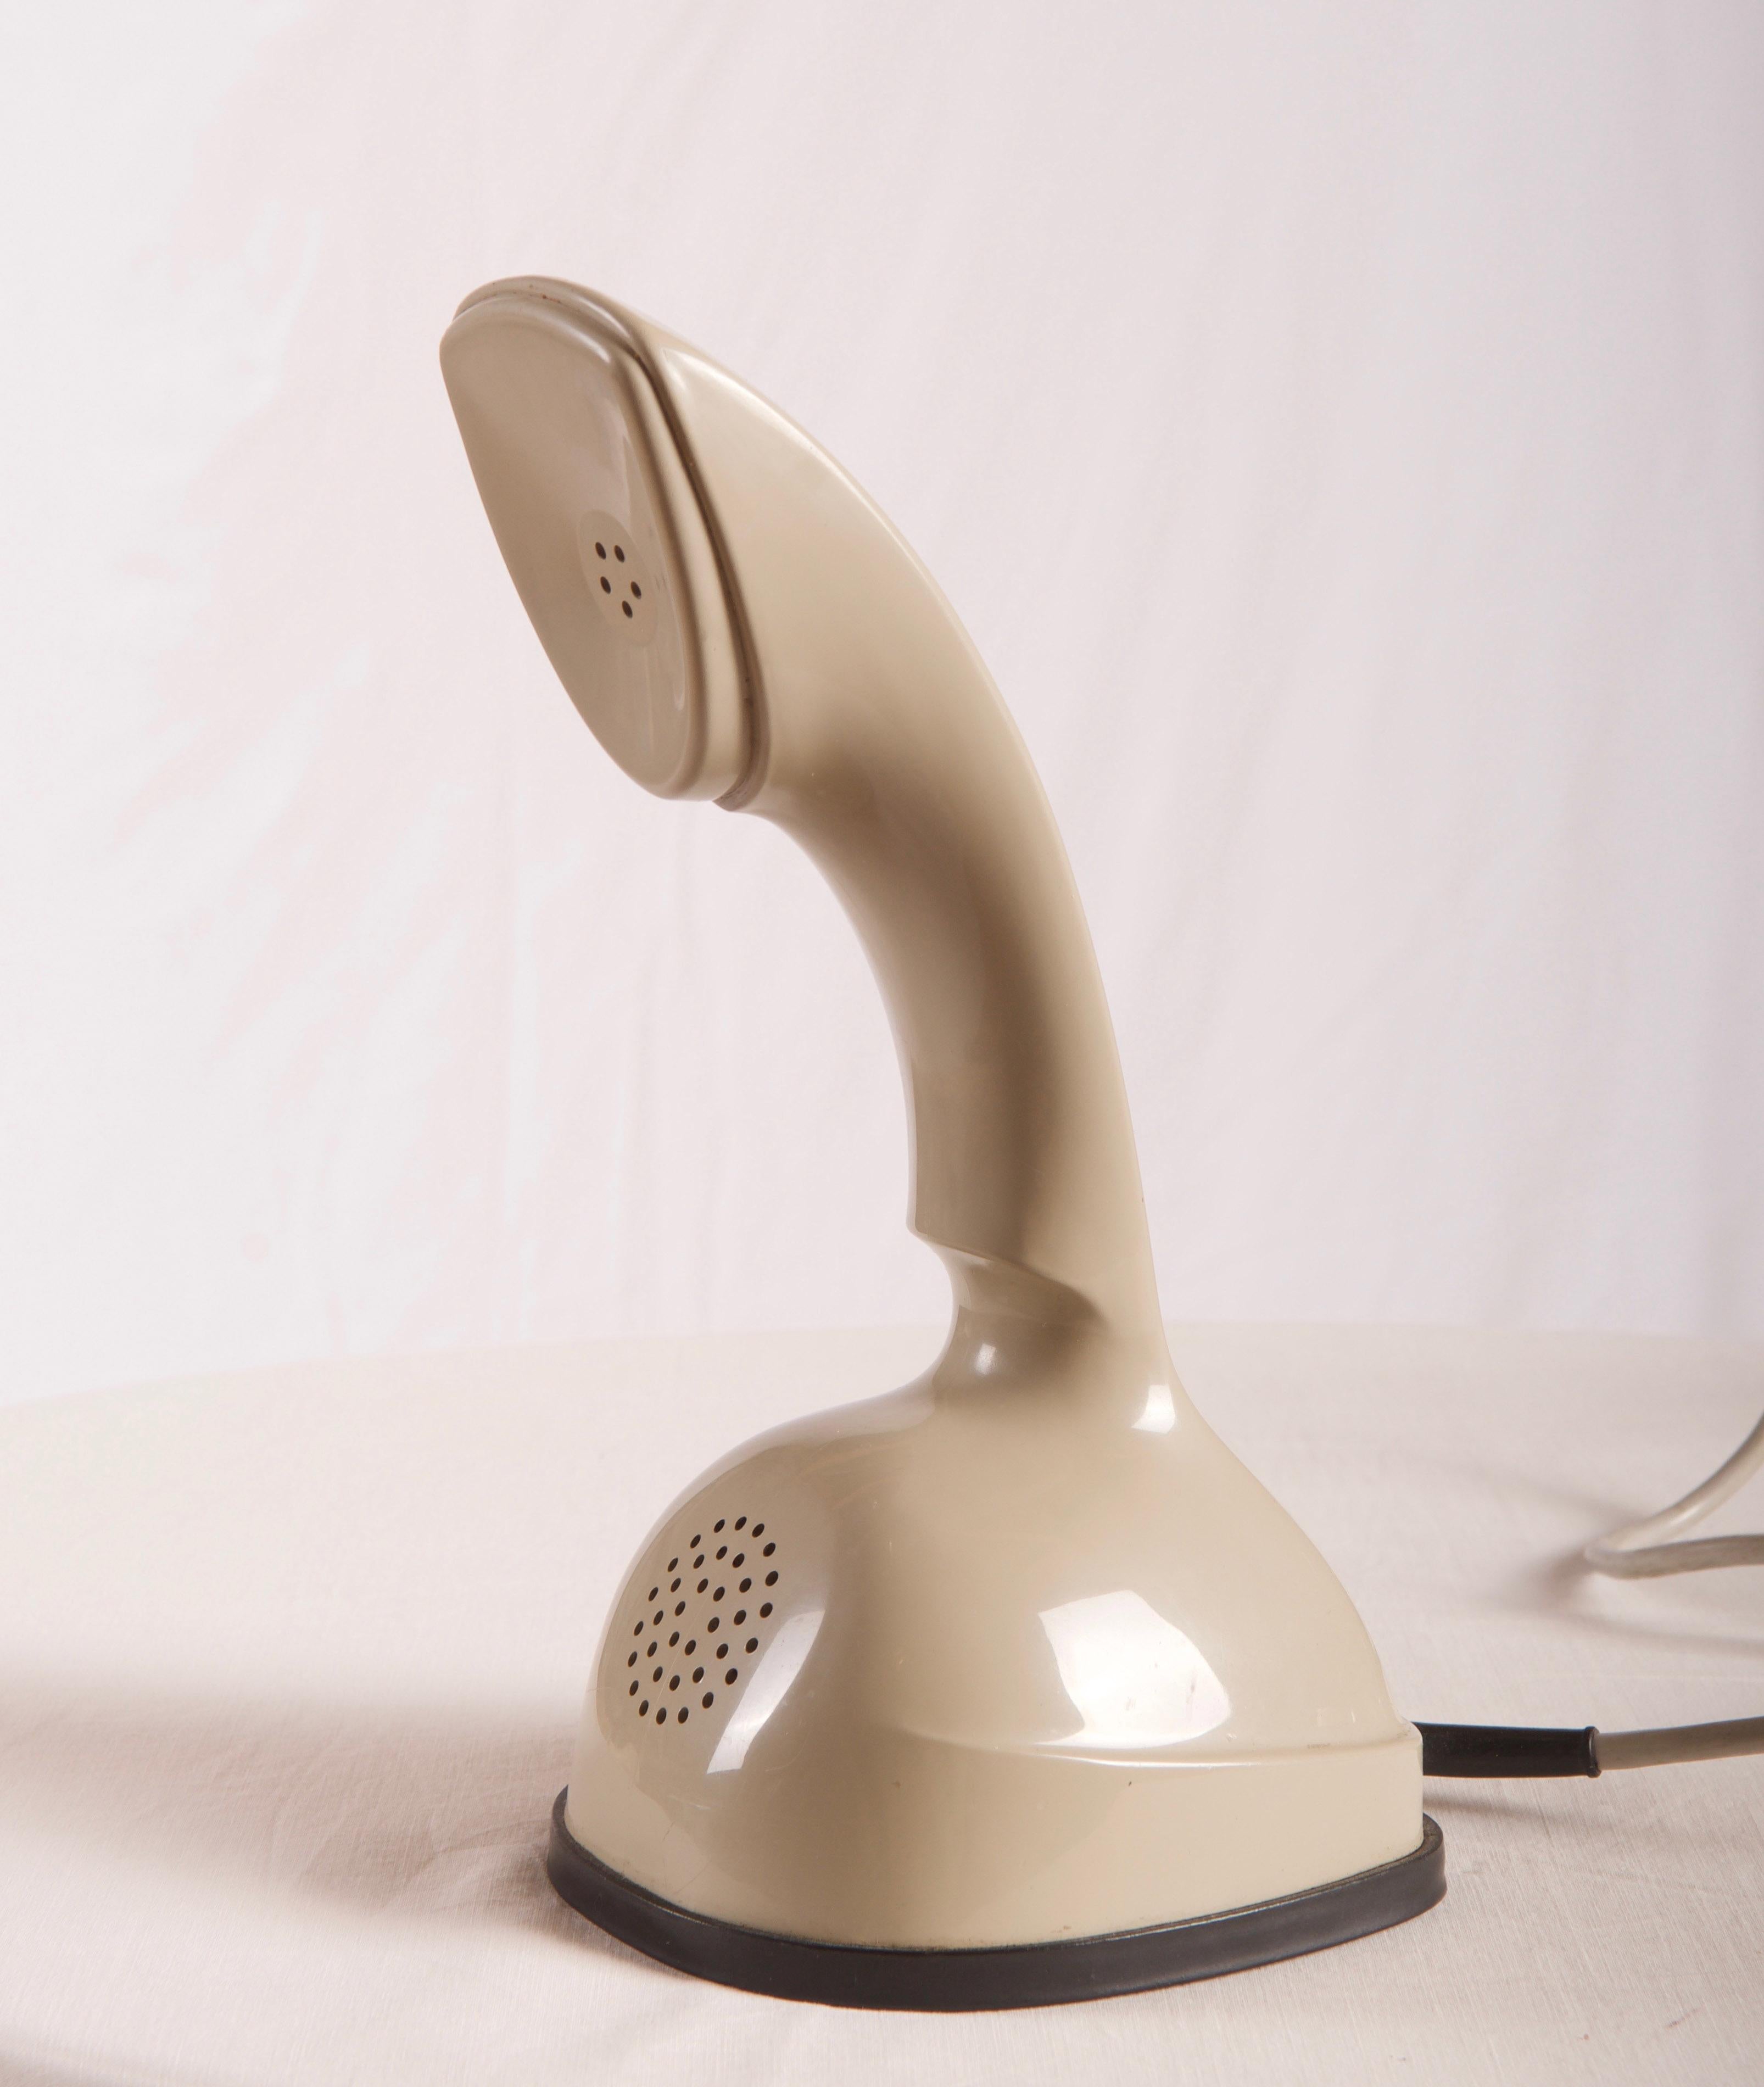 Vintage rotary dial beige Ericofone. This is the model Cobra. It is made of cream thermoplastic ABS
Designed in the 1950s in Sweden by Hugo Blomberg, Ralph Lysell and Gösta Thames, LM Ericsson.
         